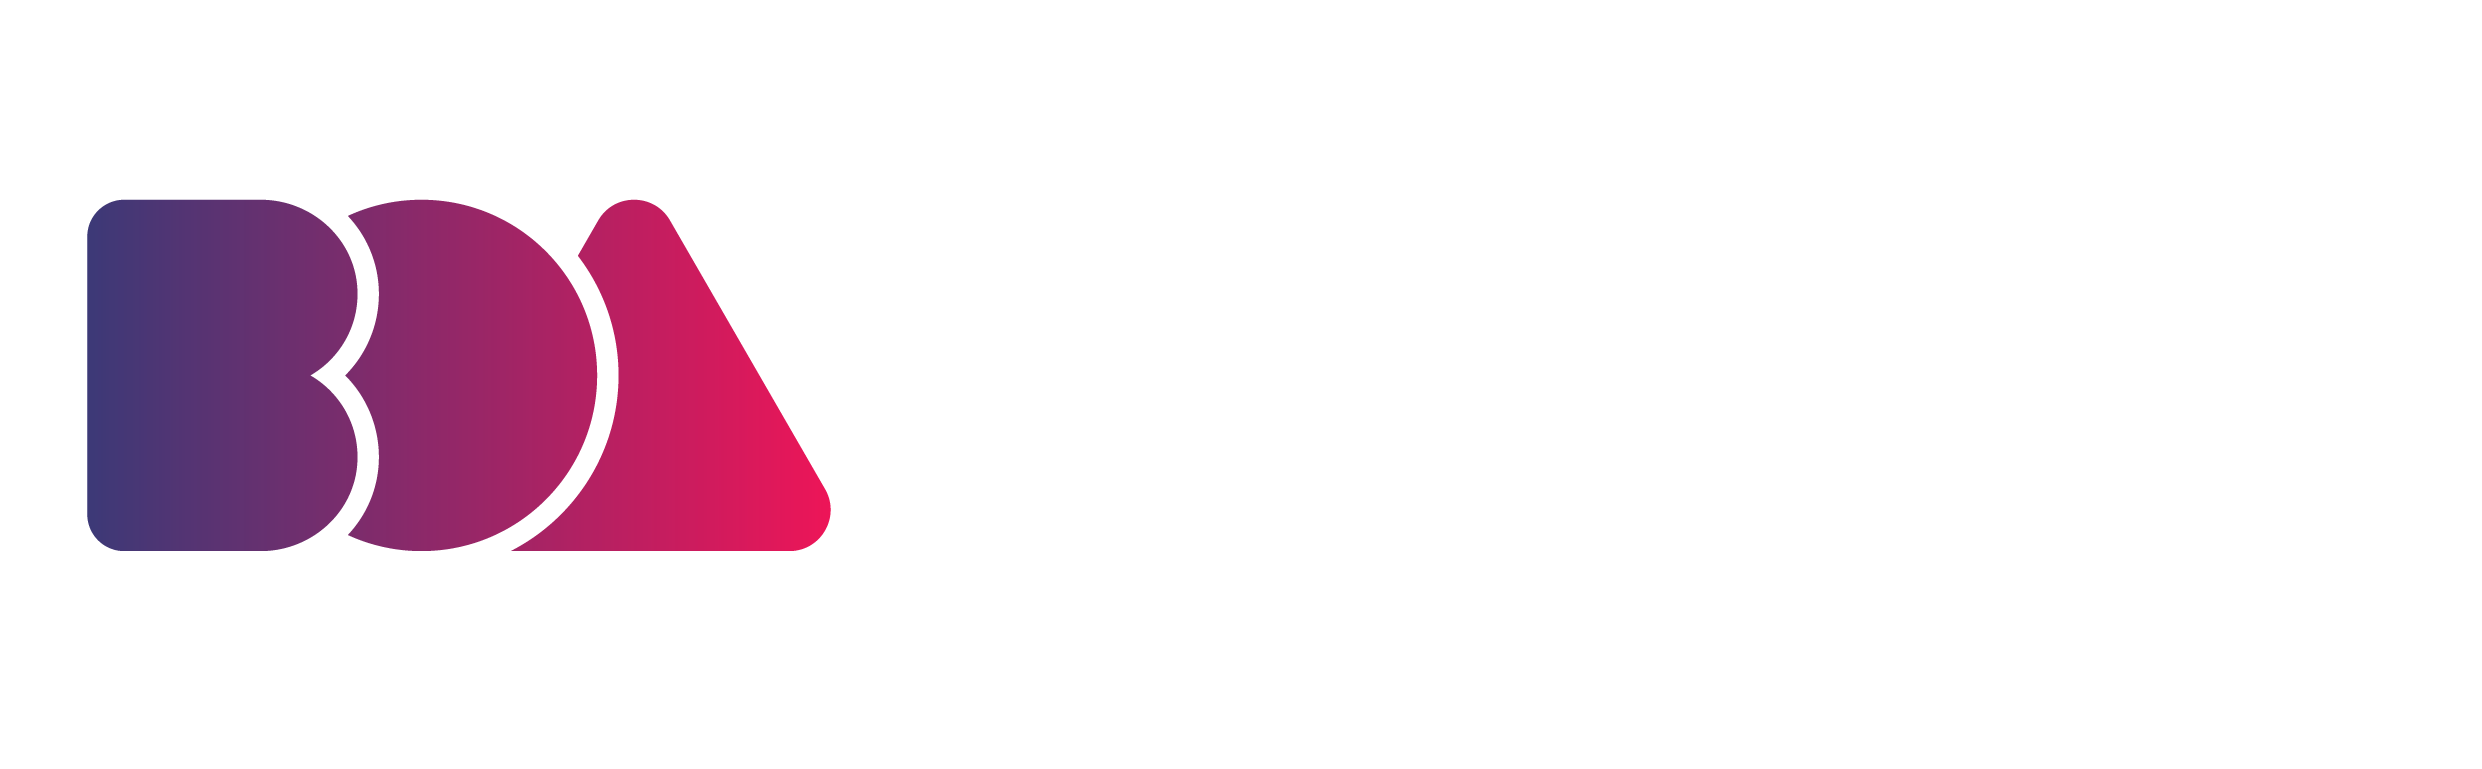 Business of Animation Footer Logo